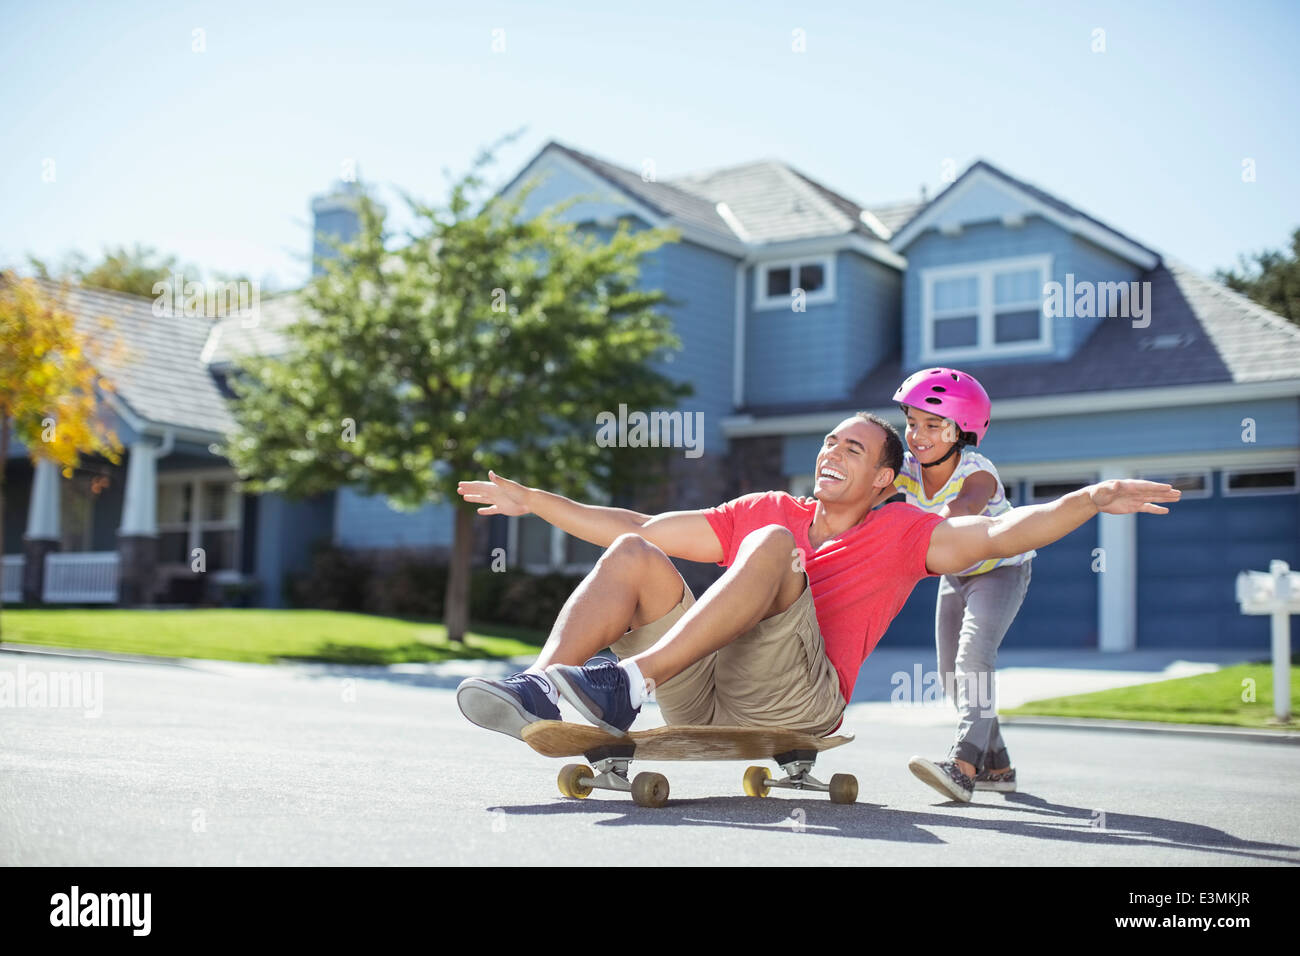 Daughter pushing father on skateboard Stock Photo